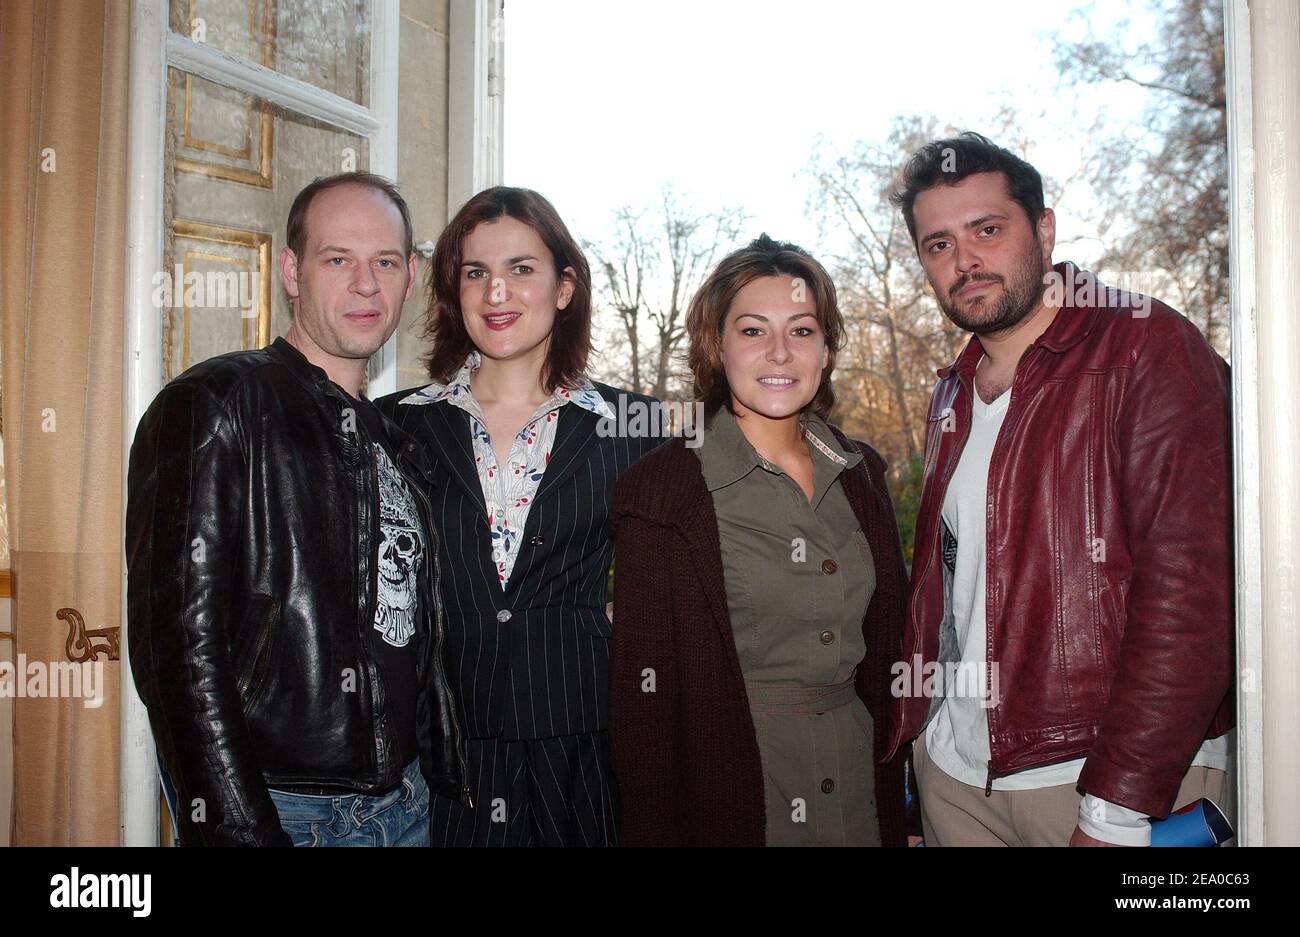 L-R) 'Camera Cafe' cast members Philippe Gatin, Armelle, Shirley Bousquet  and Philippe Cura pose at the 10th 'Lauriers de la Radio et de la  Television' awards ceremony held at the Senate in